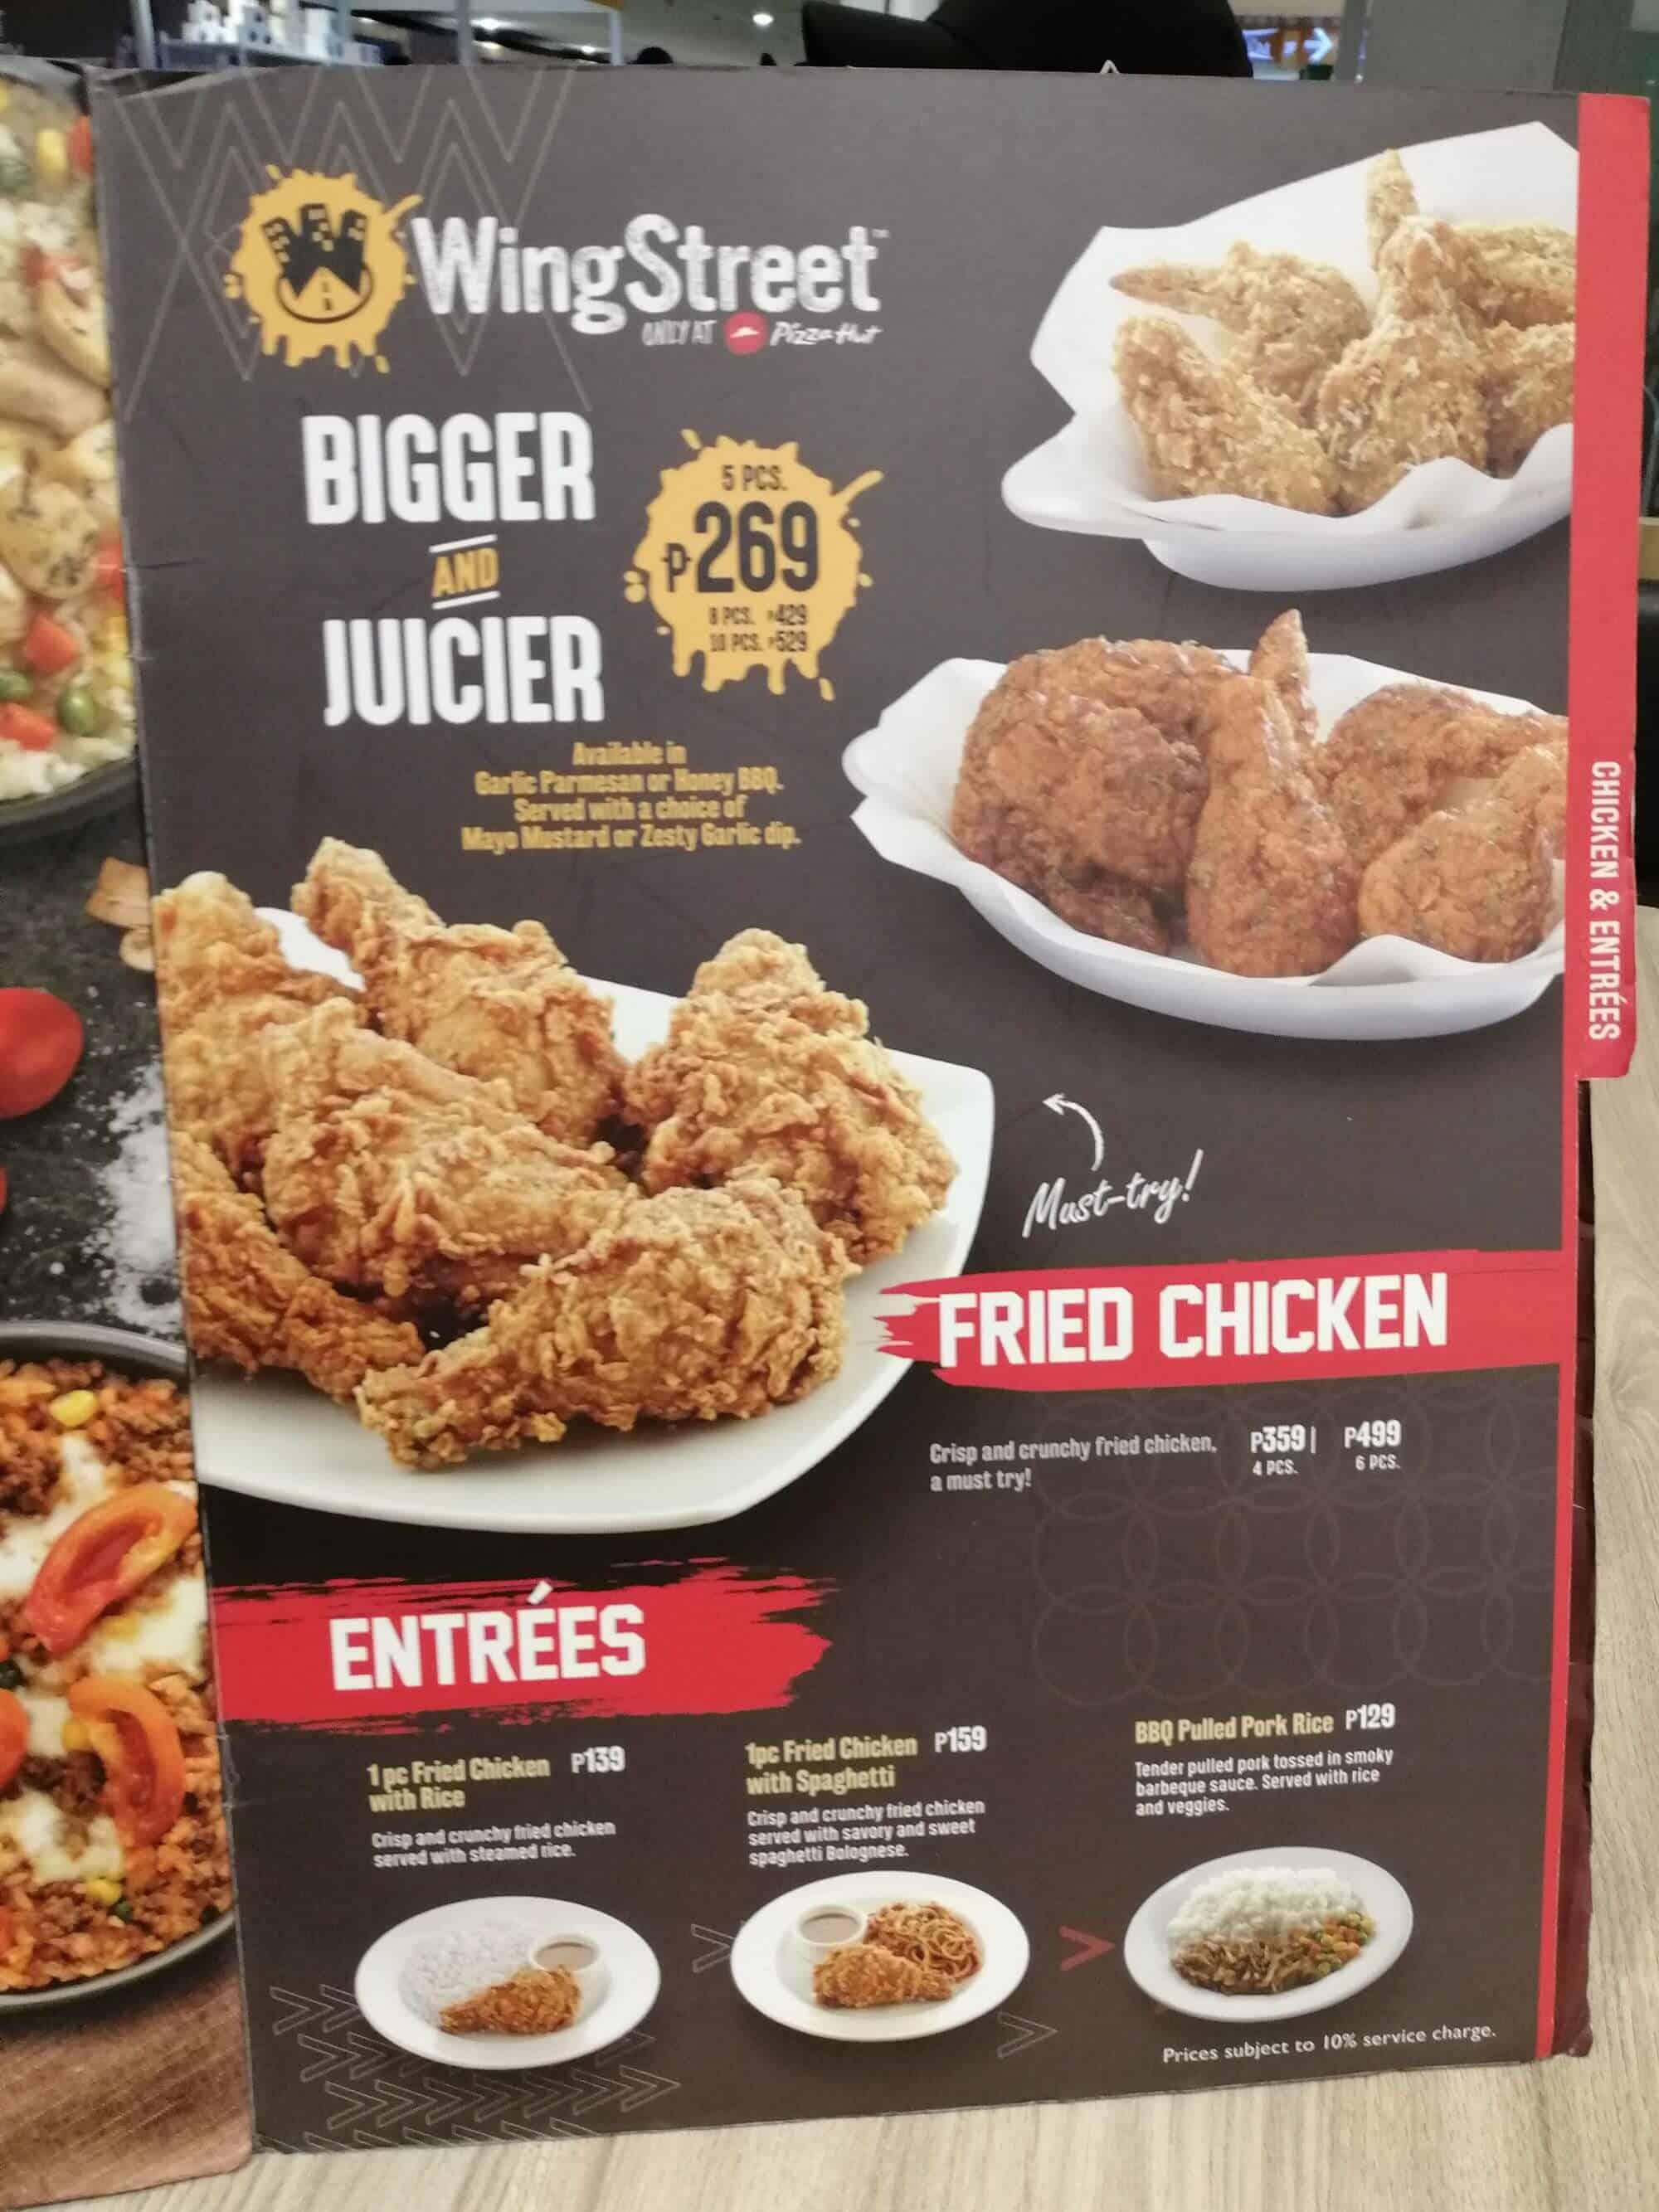 Classic Chicken Wings Or Wingstreet Food At Pizza Hut